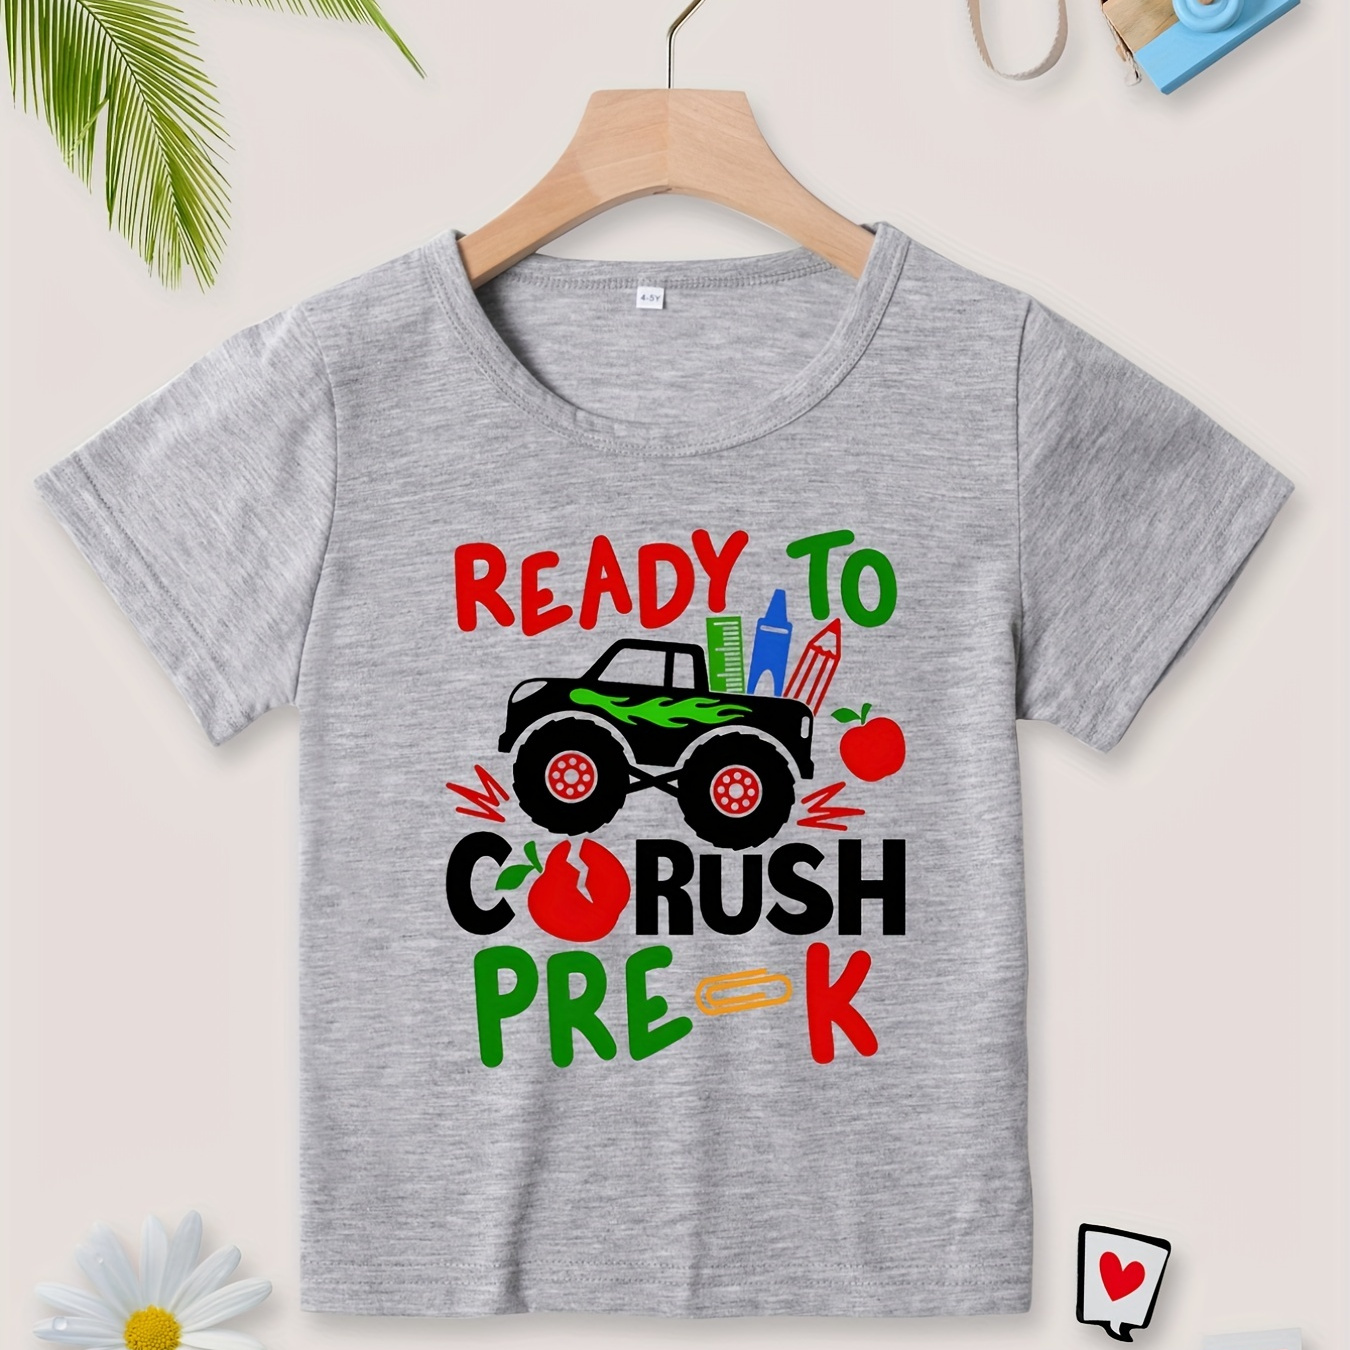 

Cartoon Truck Ready To Crush Pre-k Print T Shirt, Tees For Kids Boys, Casual Short Sleeve T-shirt For Summer Spring Fall, Tops As Gifts